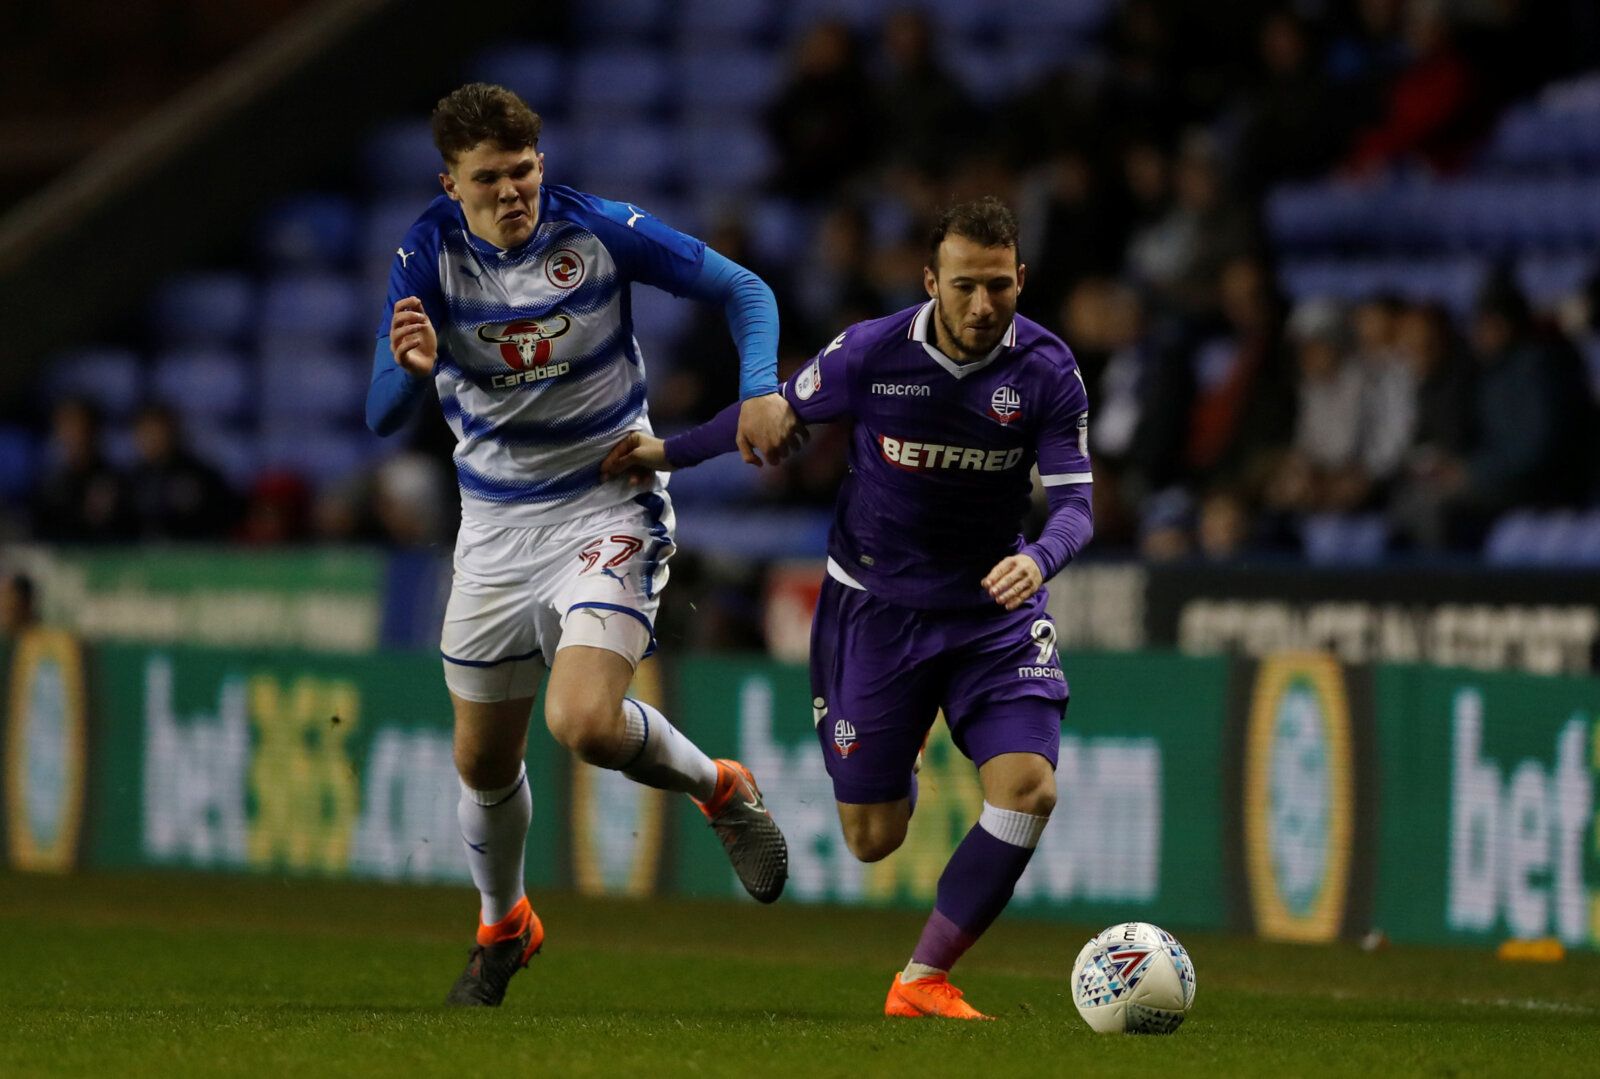 Soccer Football - Championship - Reading vs Bolton Wanderers - Madejski Stadium, Reading, Britain - March 6, 2018  Reading's Tom Holmes in action with Bolton Wanderers' Adam Le Fondre   Action Images/Matthew Childs  EDITORIAL USE ONLY. No use with unauthorized audio, video, data, fixture lists, club/league logos or 